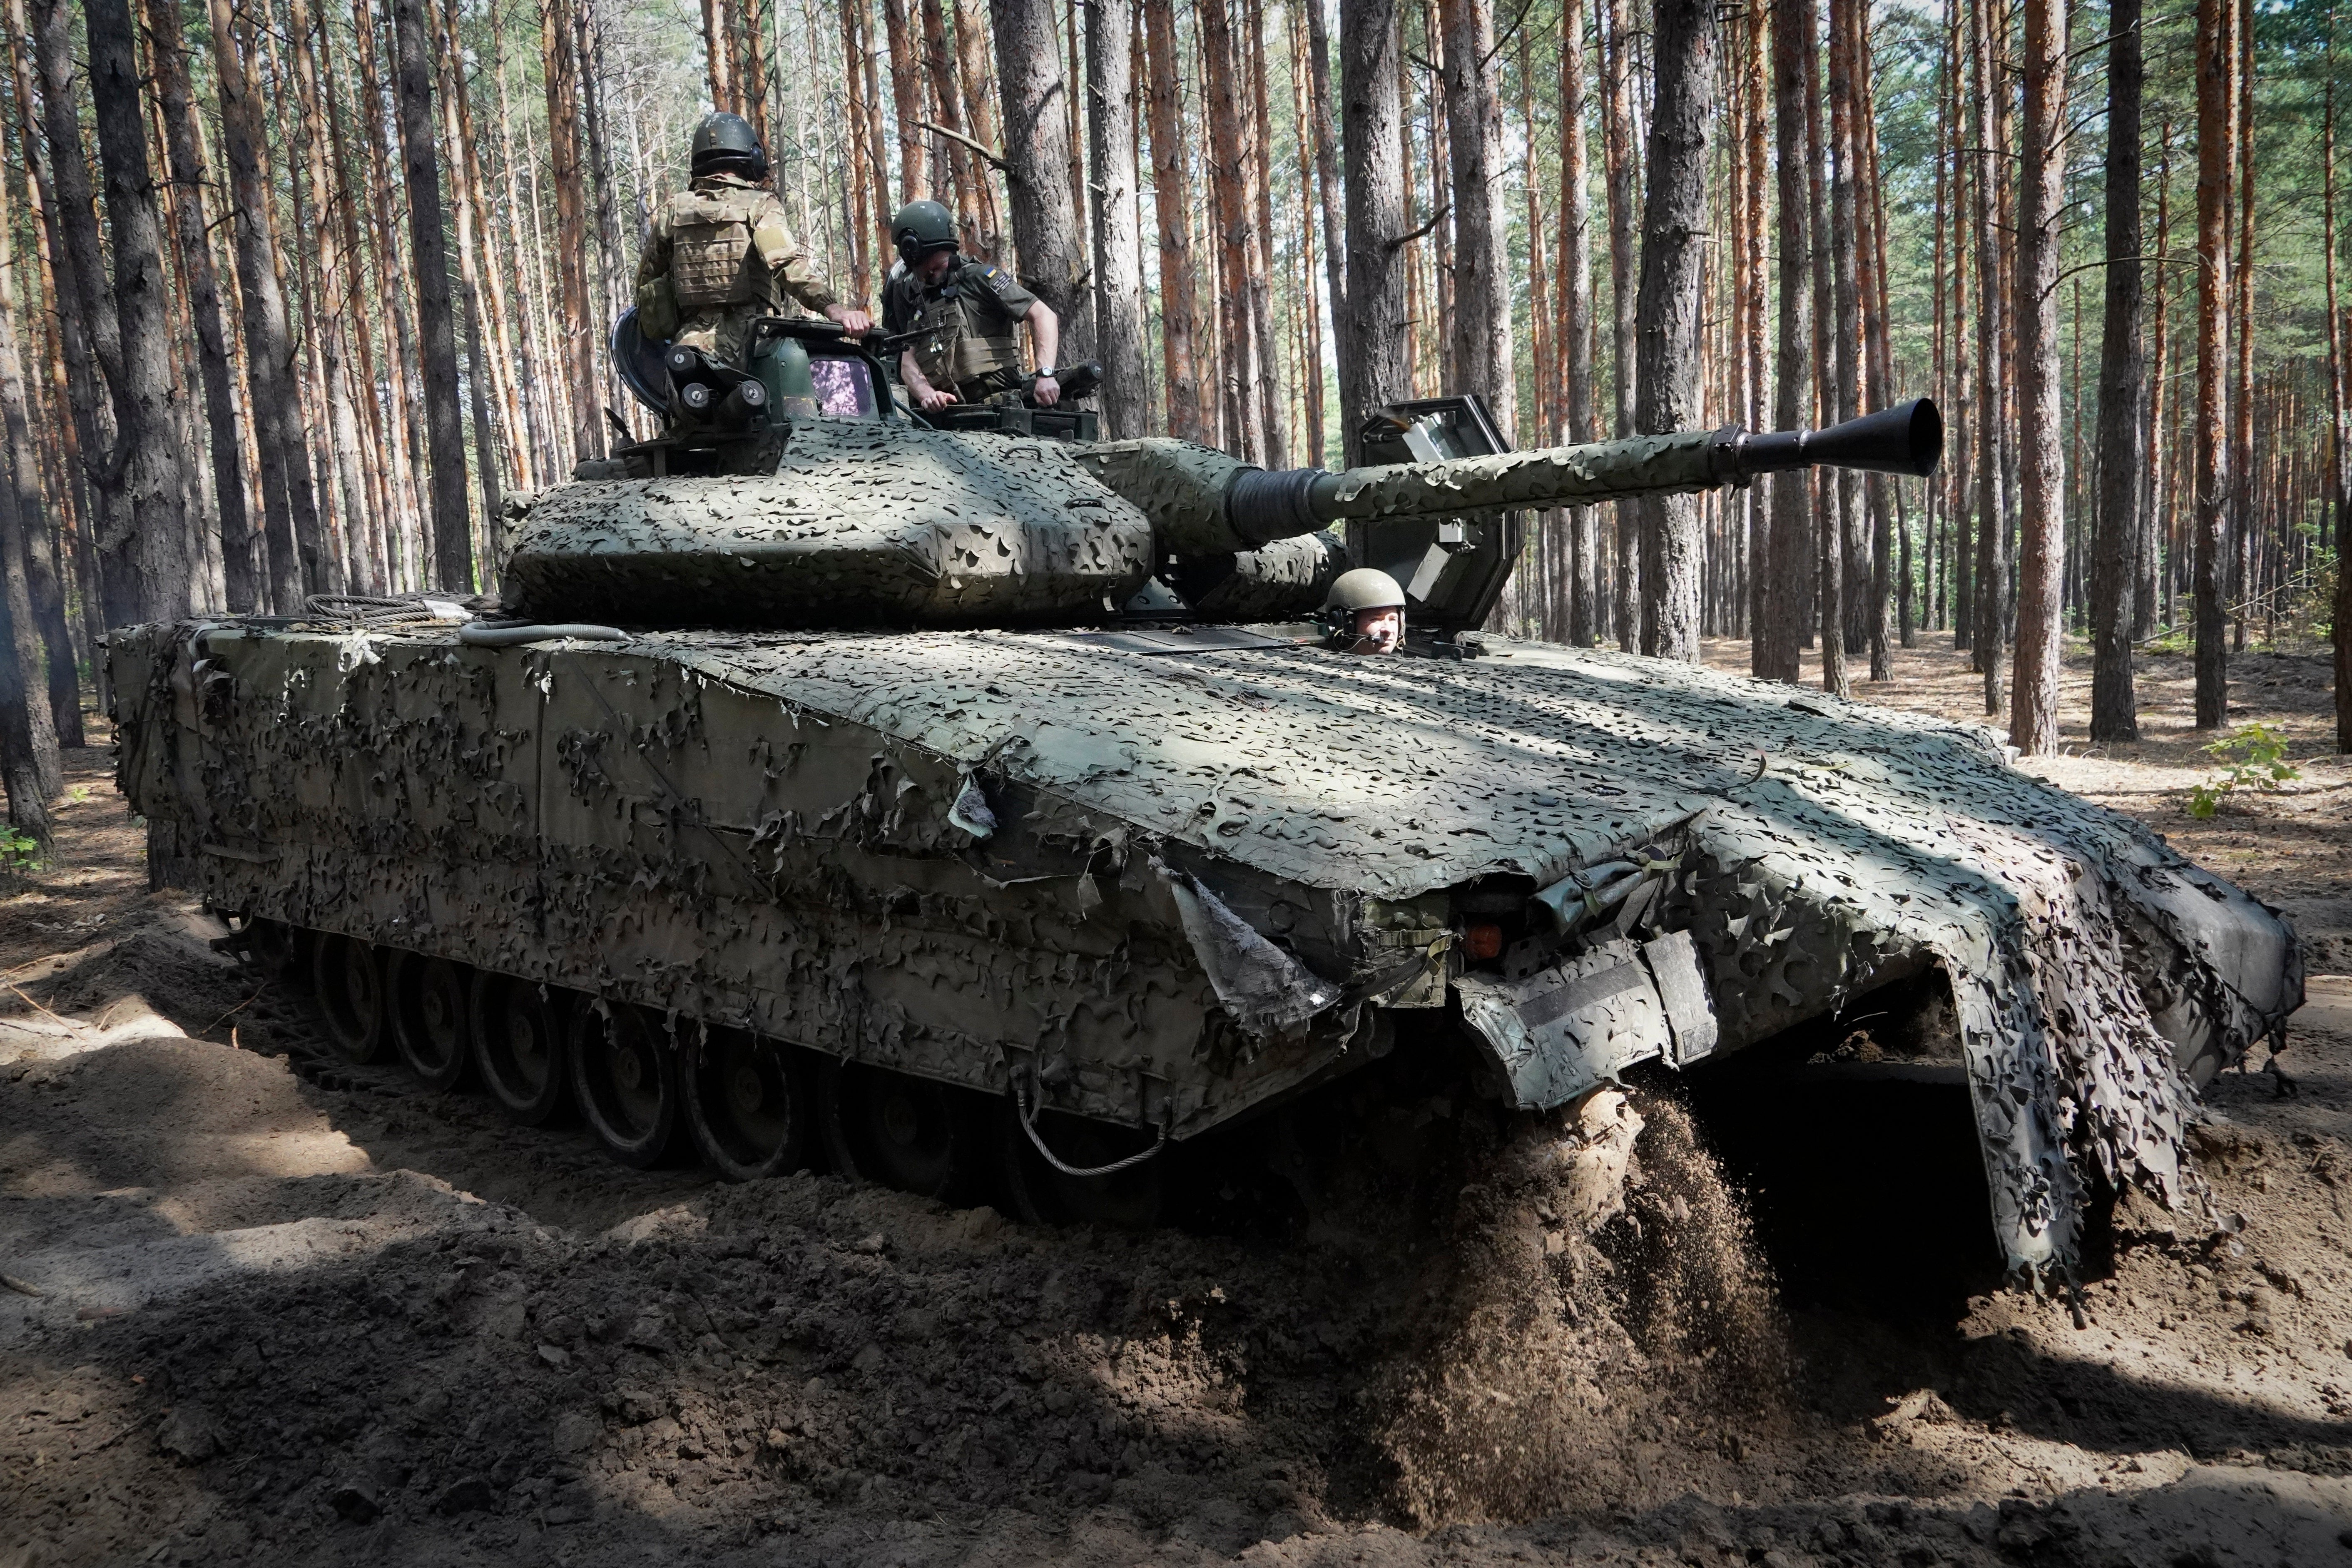 Ukrainian soldiers ride in a combat vehicle near the front line in the Kharkiv region